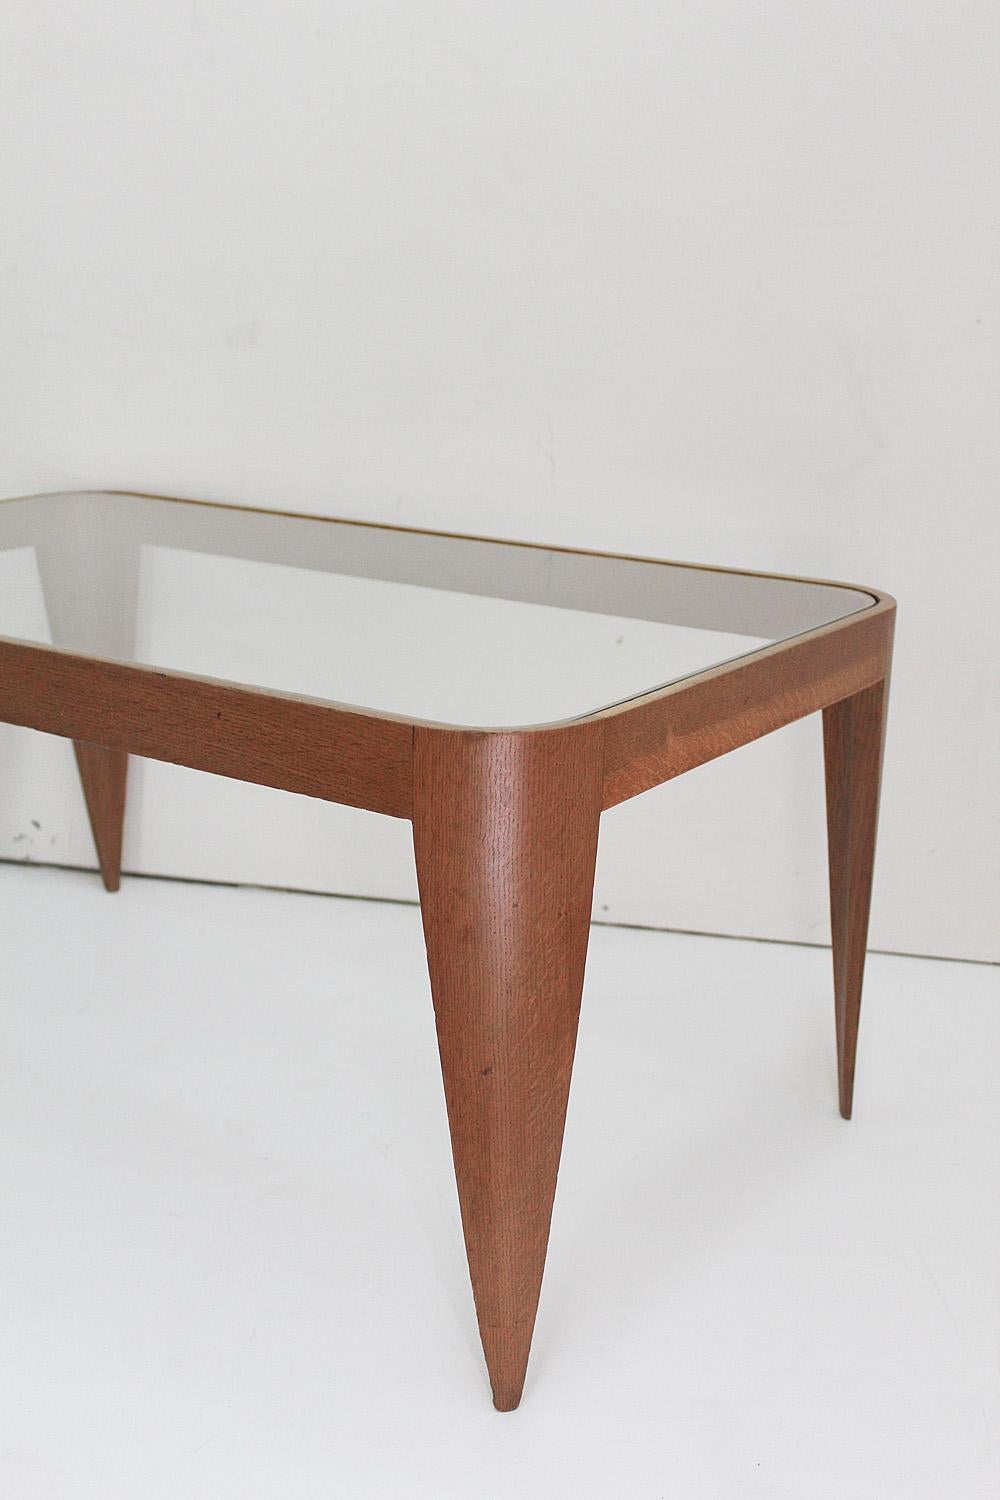 Mid-20th Century Oak and Glass Coffee Table by Gio Ponti, Italy 1940